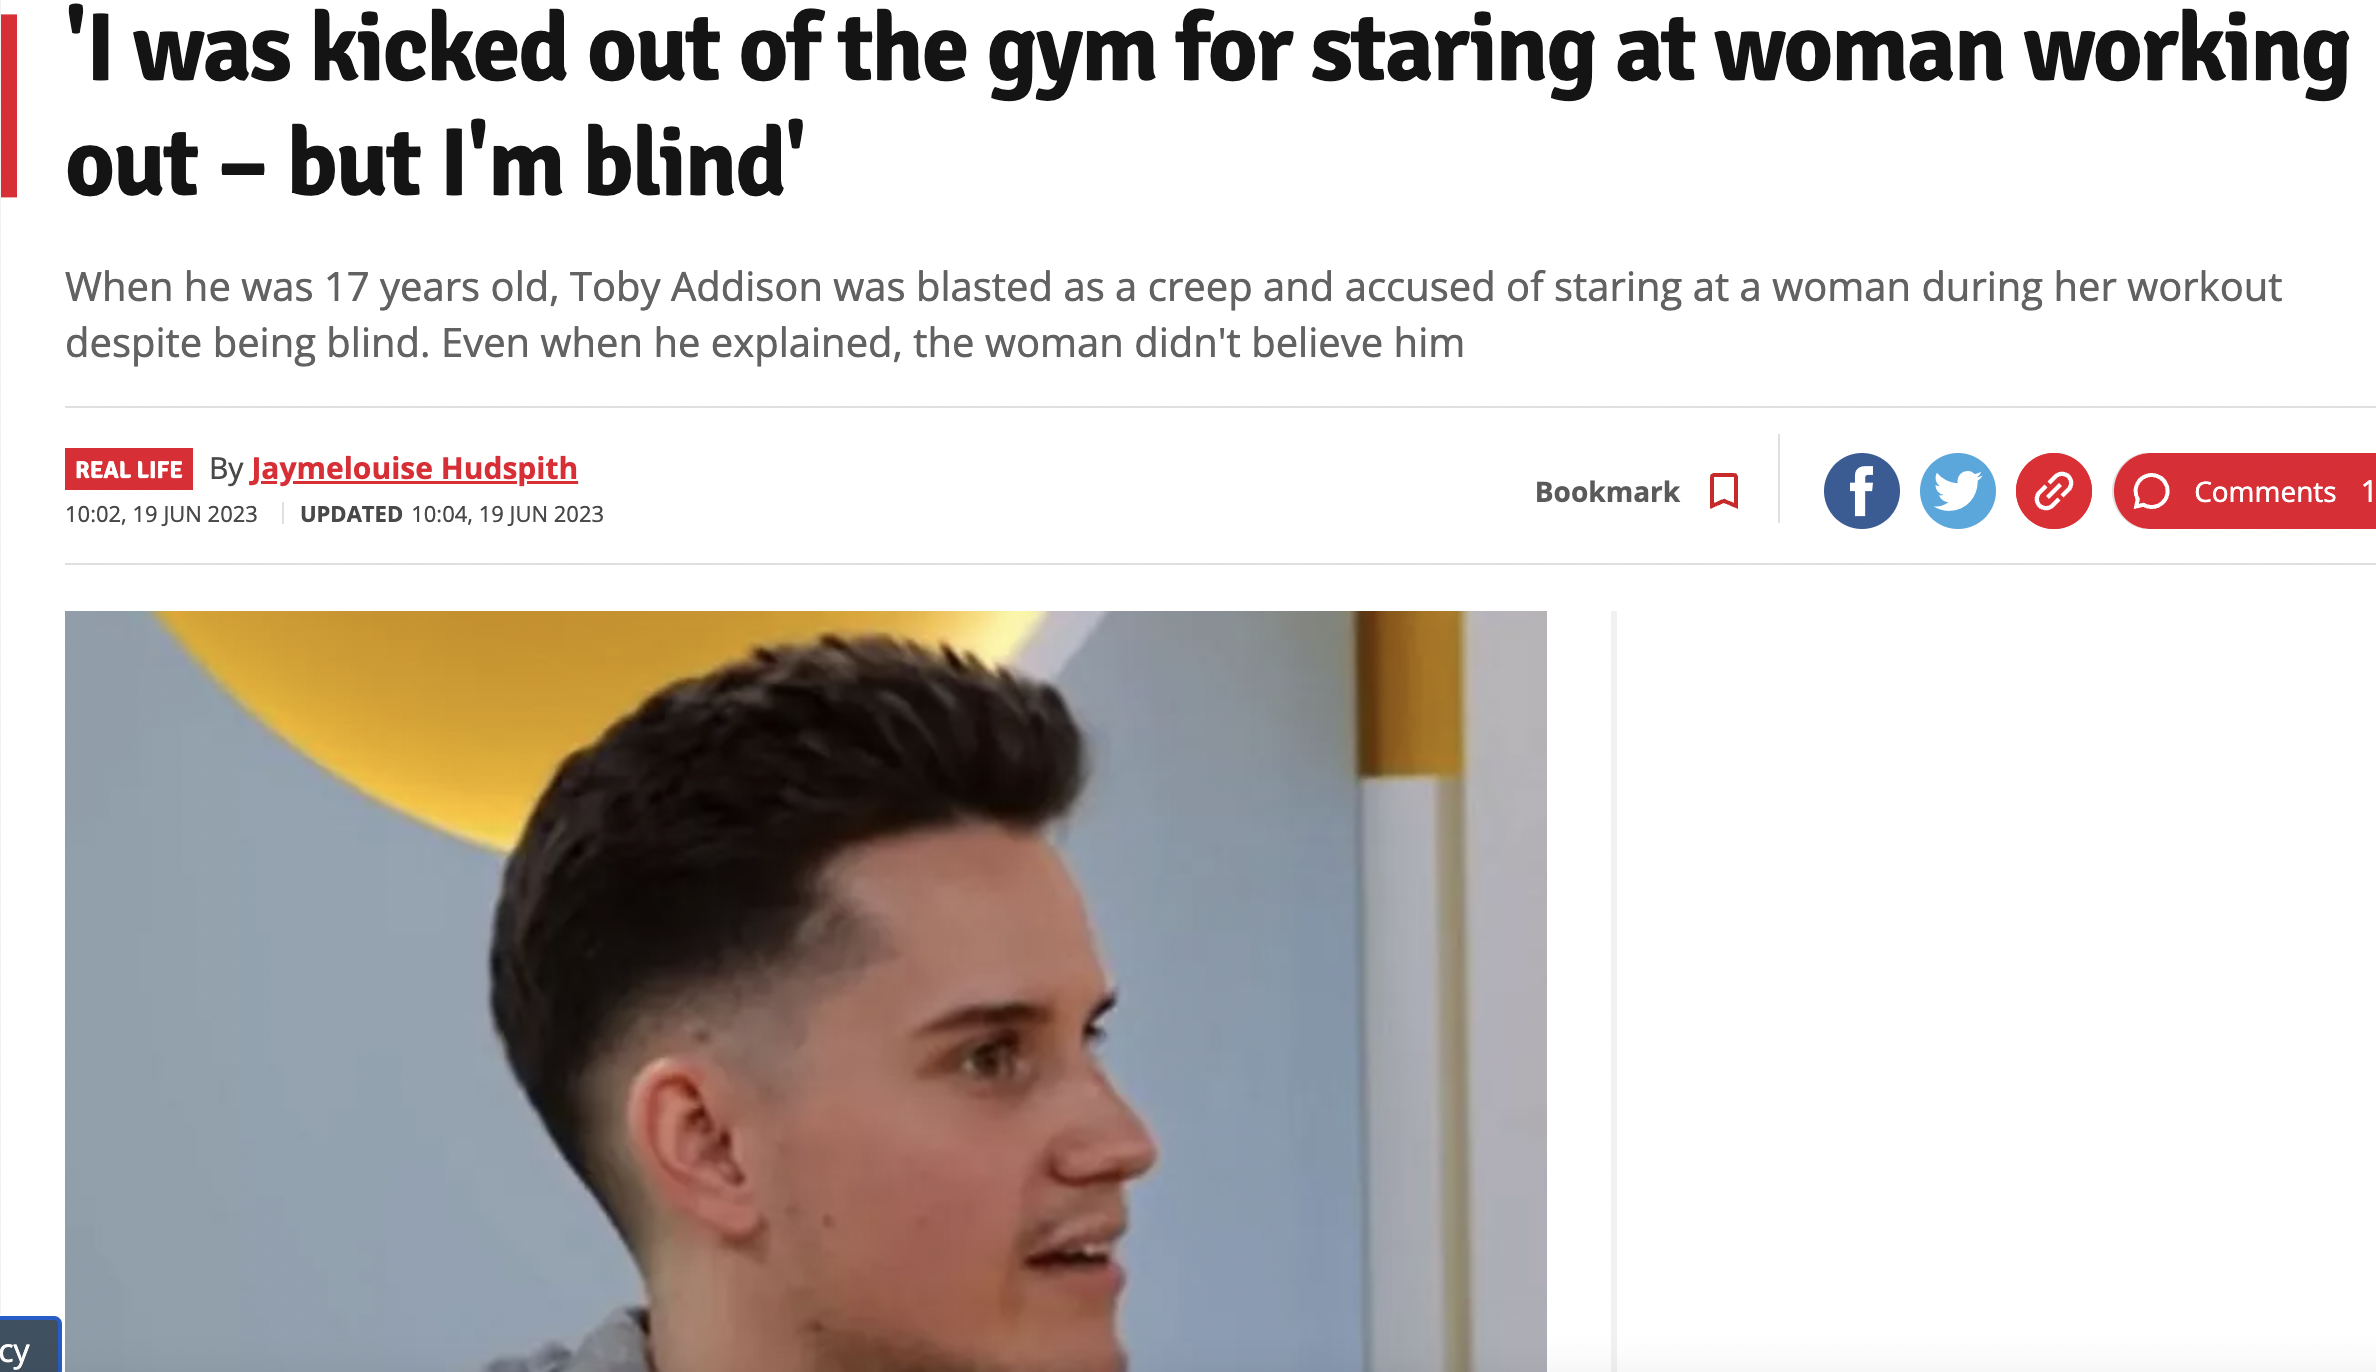 website - cy 'I was kicked out of the gym for staring at woman working out but I'm blind' When he was 17 years old, Toby Addison was blasted as a creep and accused of staring at a woman during her workout despite being blind. Even when he explained, the w